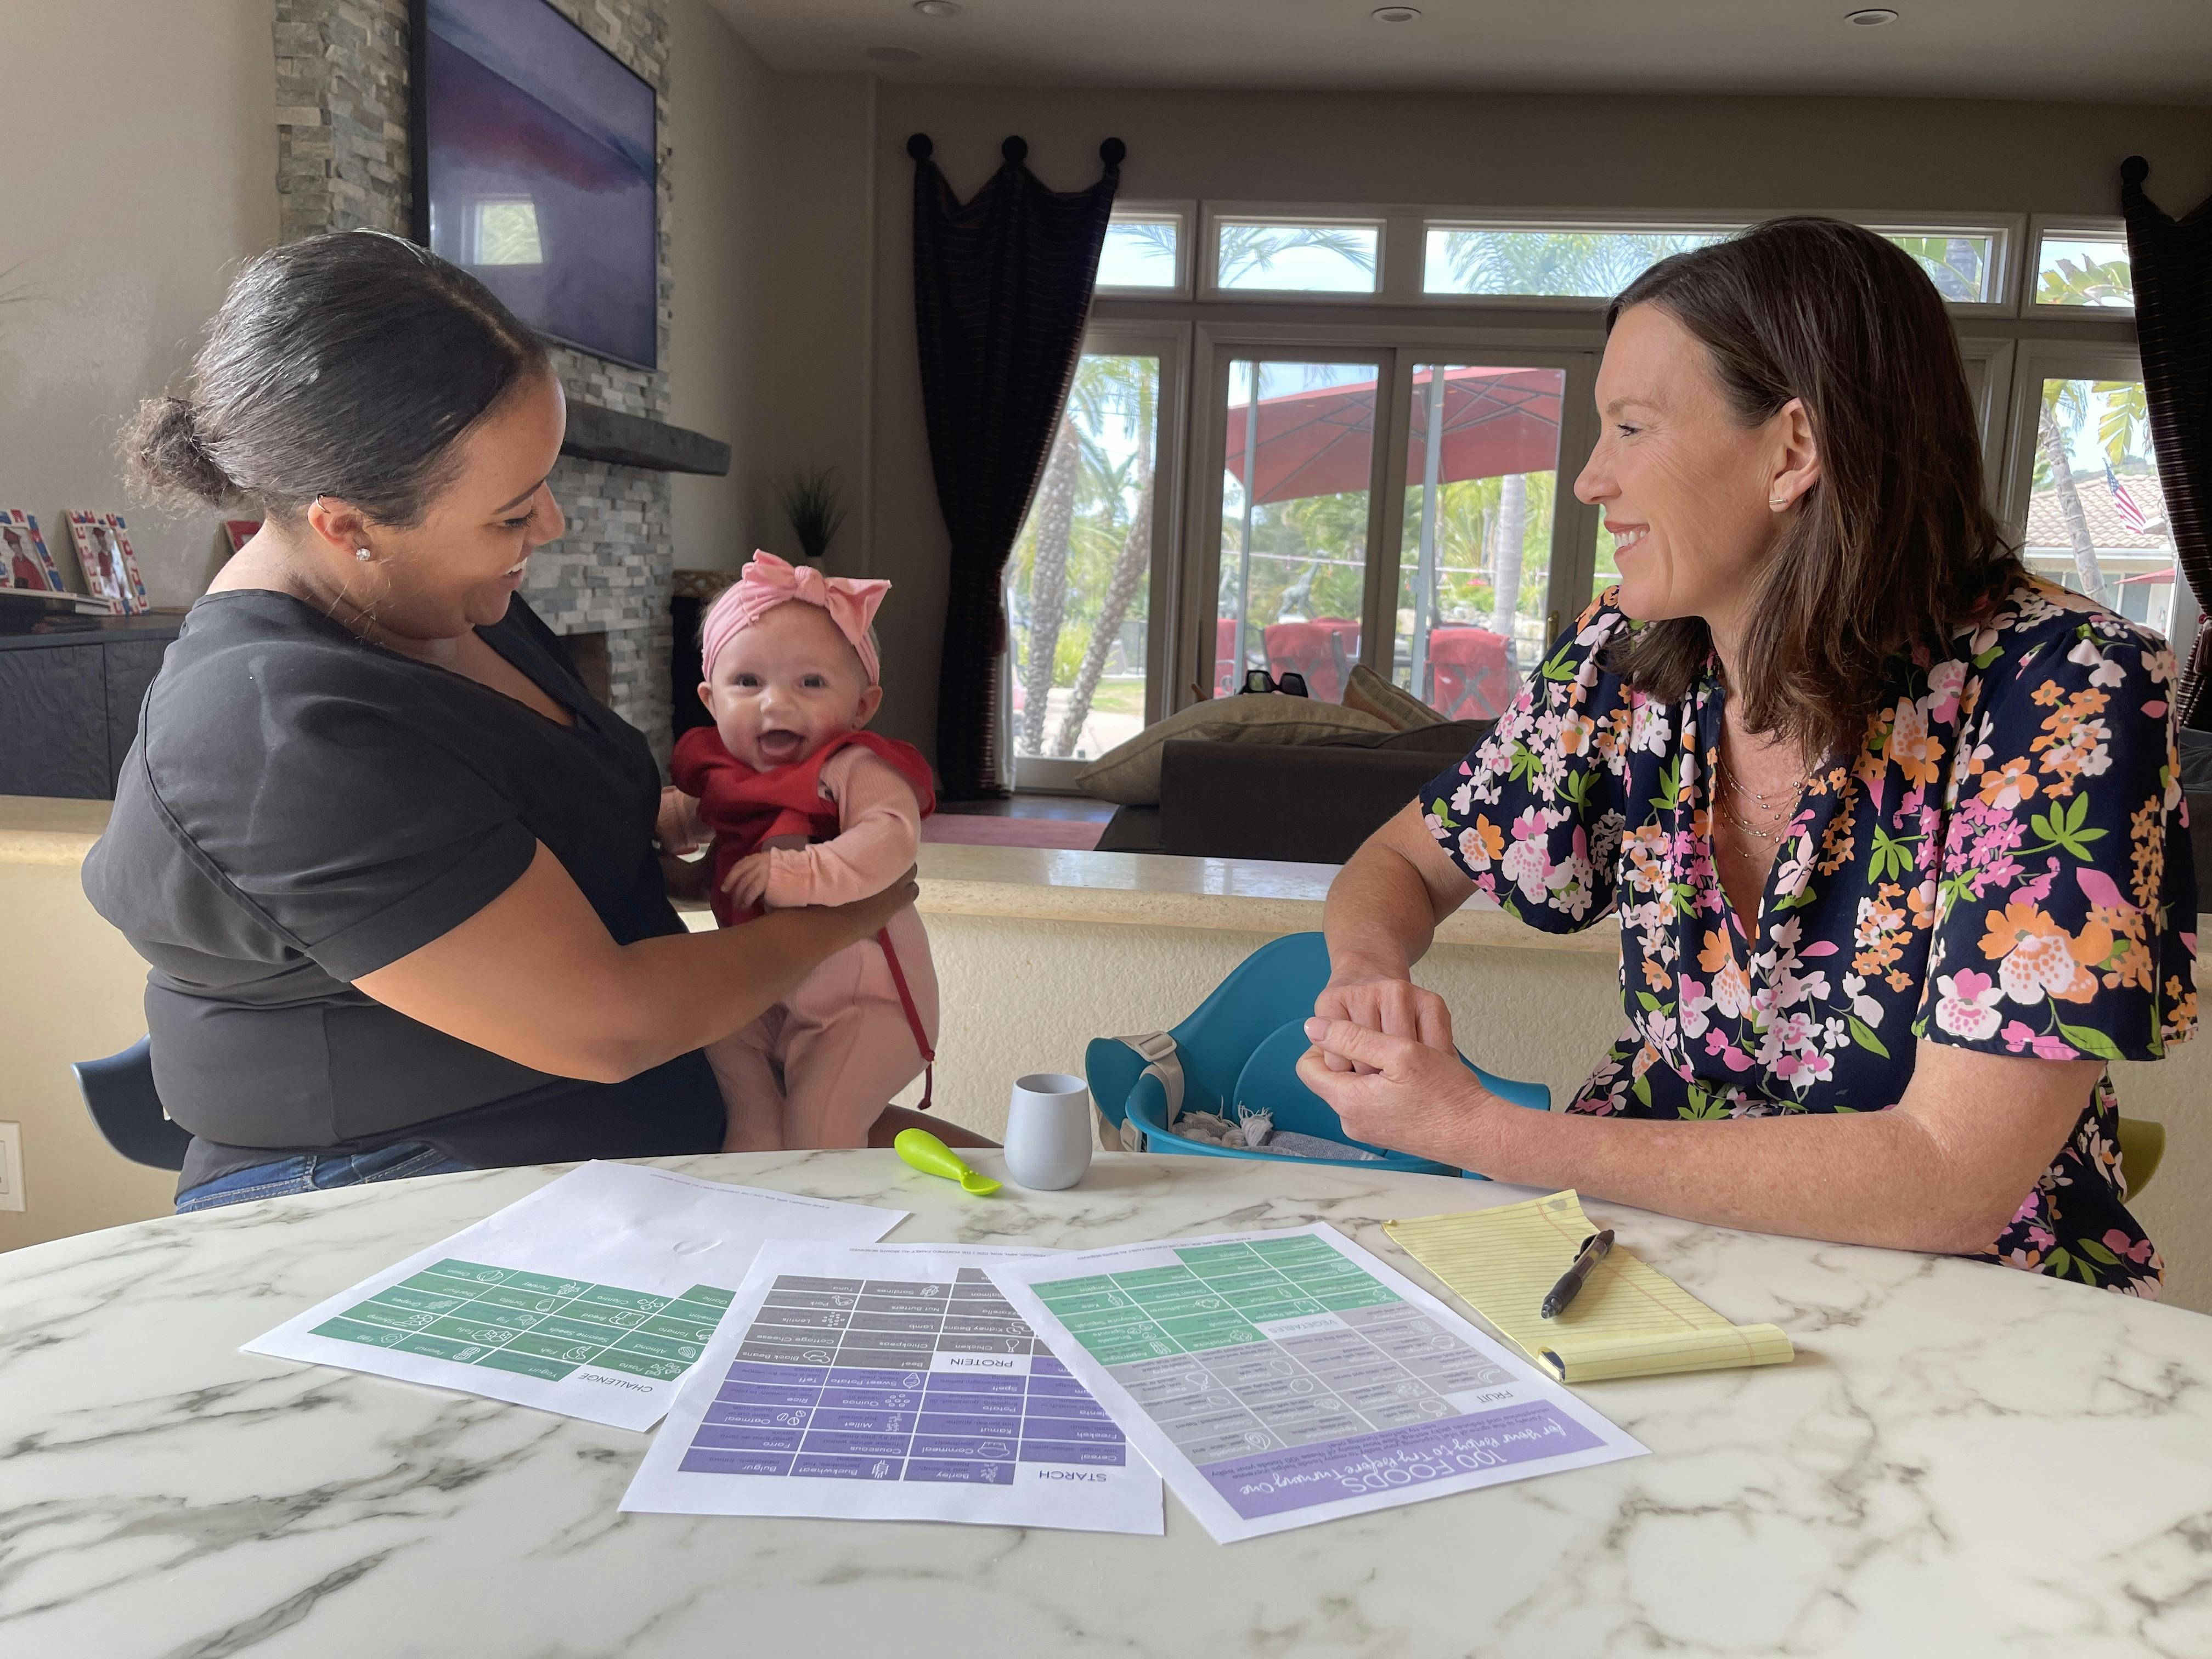 Photograph of mom holding a baby seated at table sitting next to dietitian Katie Ferraro with the 100 FIRST FOODS list spread out on the table in the foreground